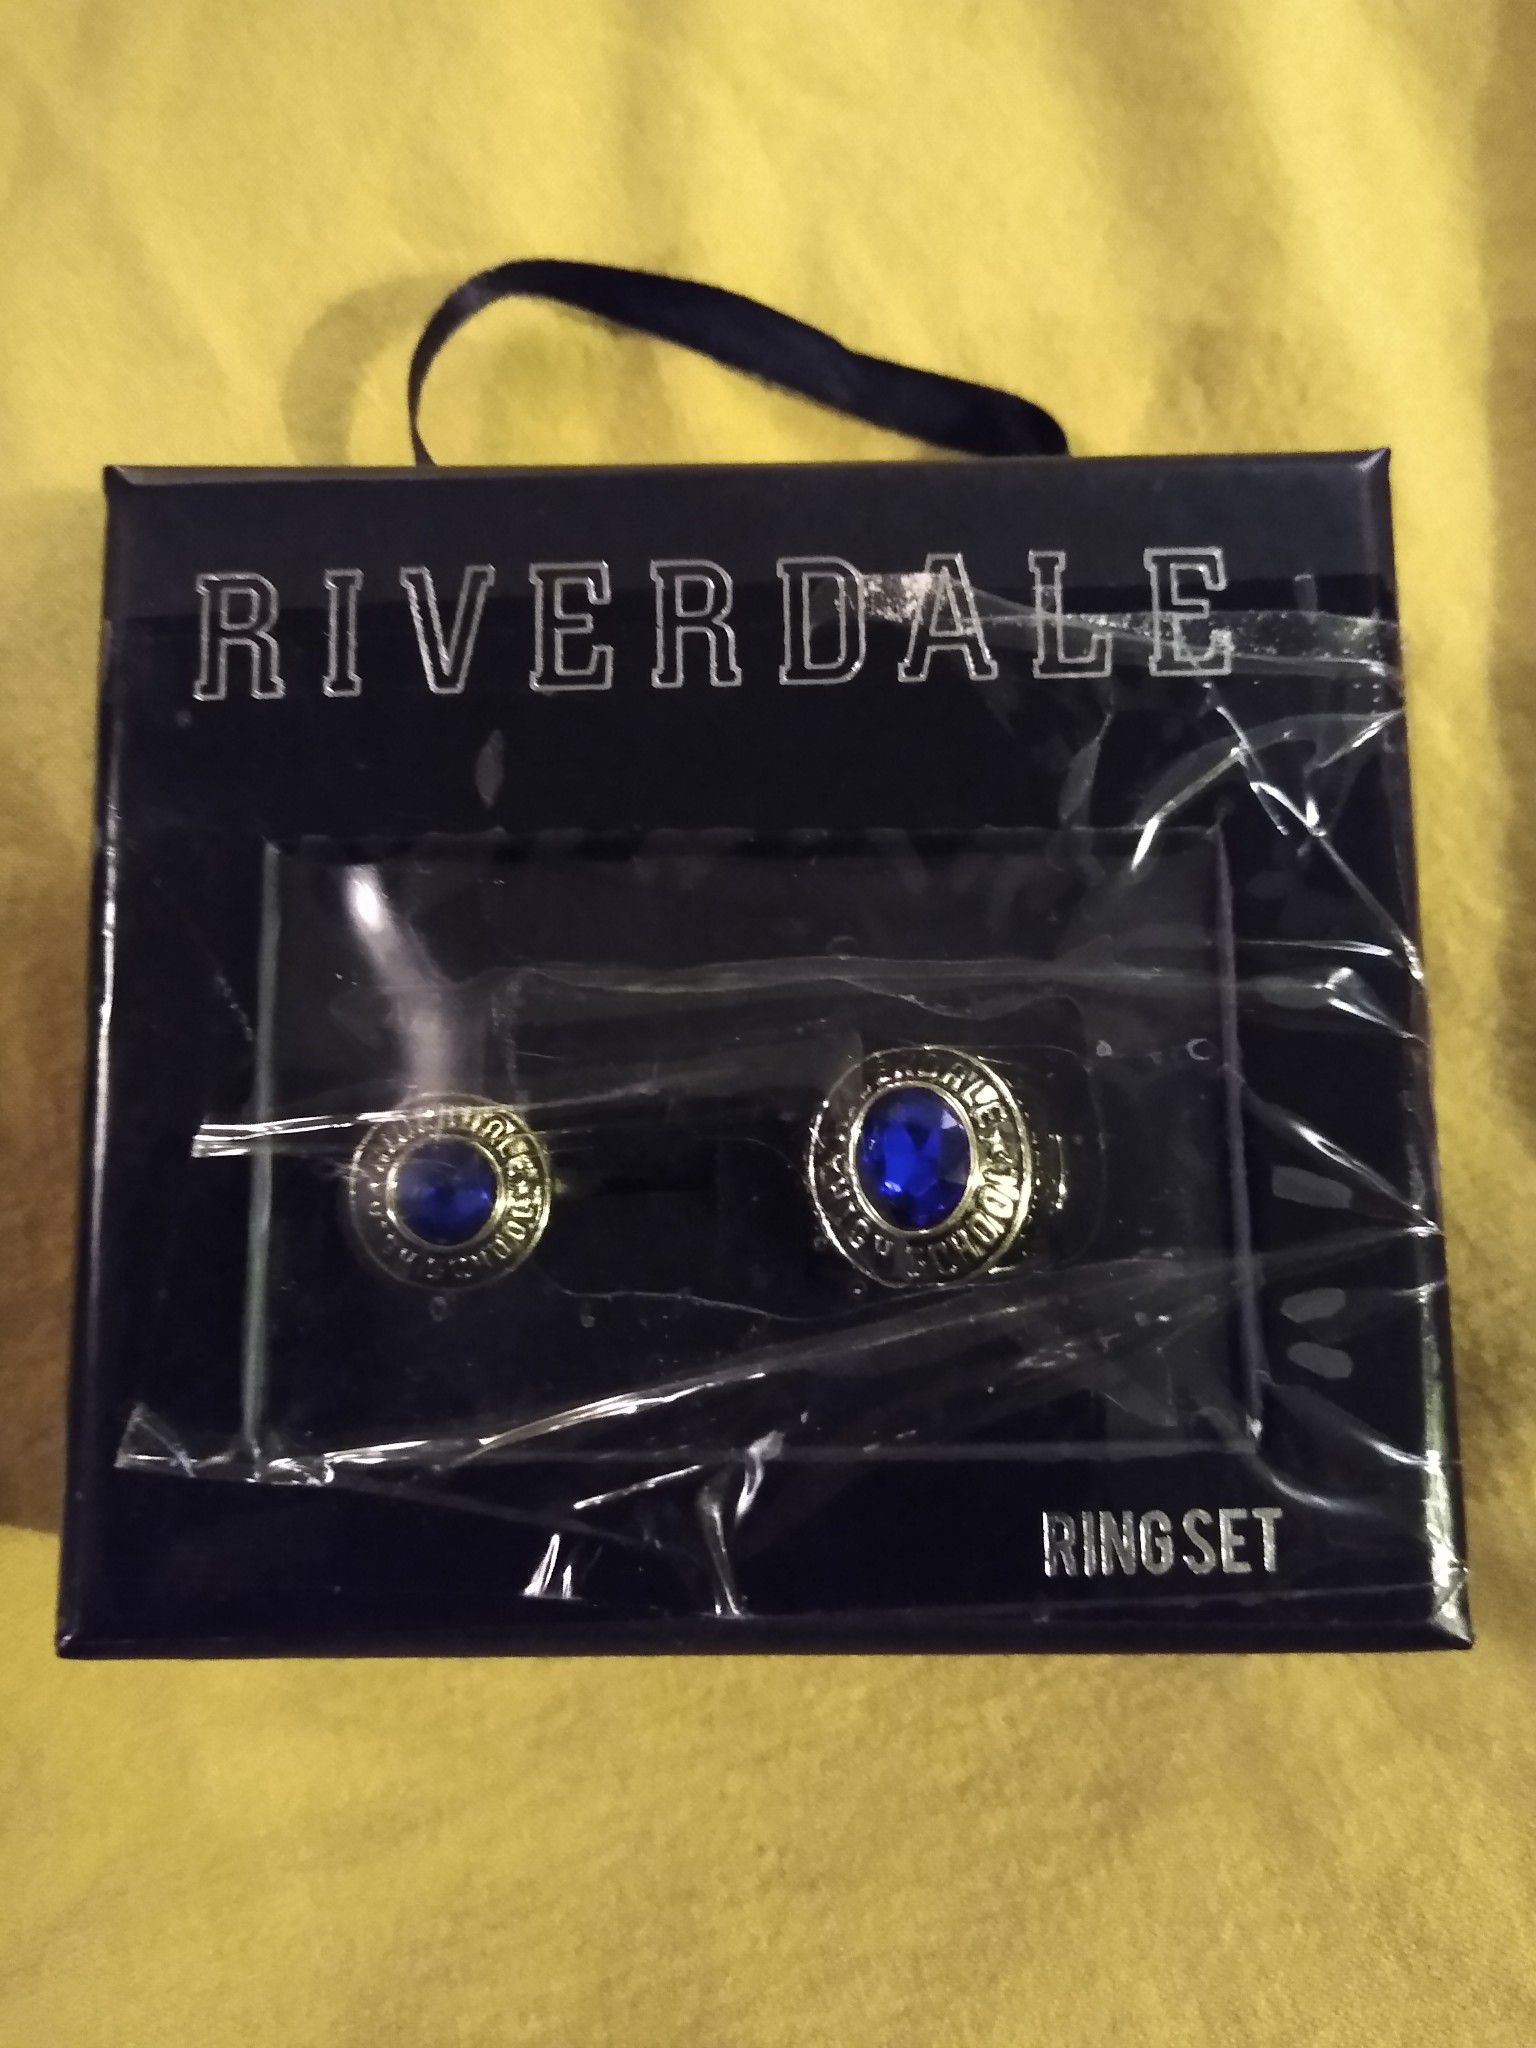 The TV show Riverdale class rings